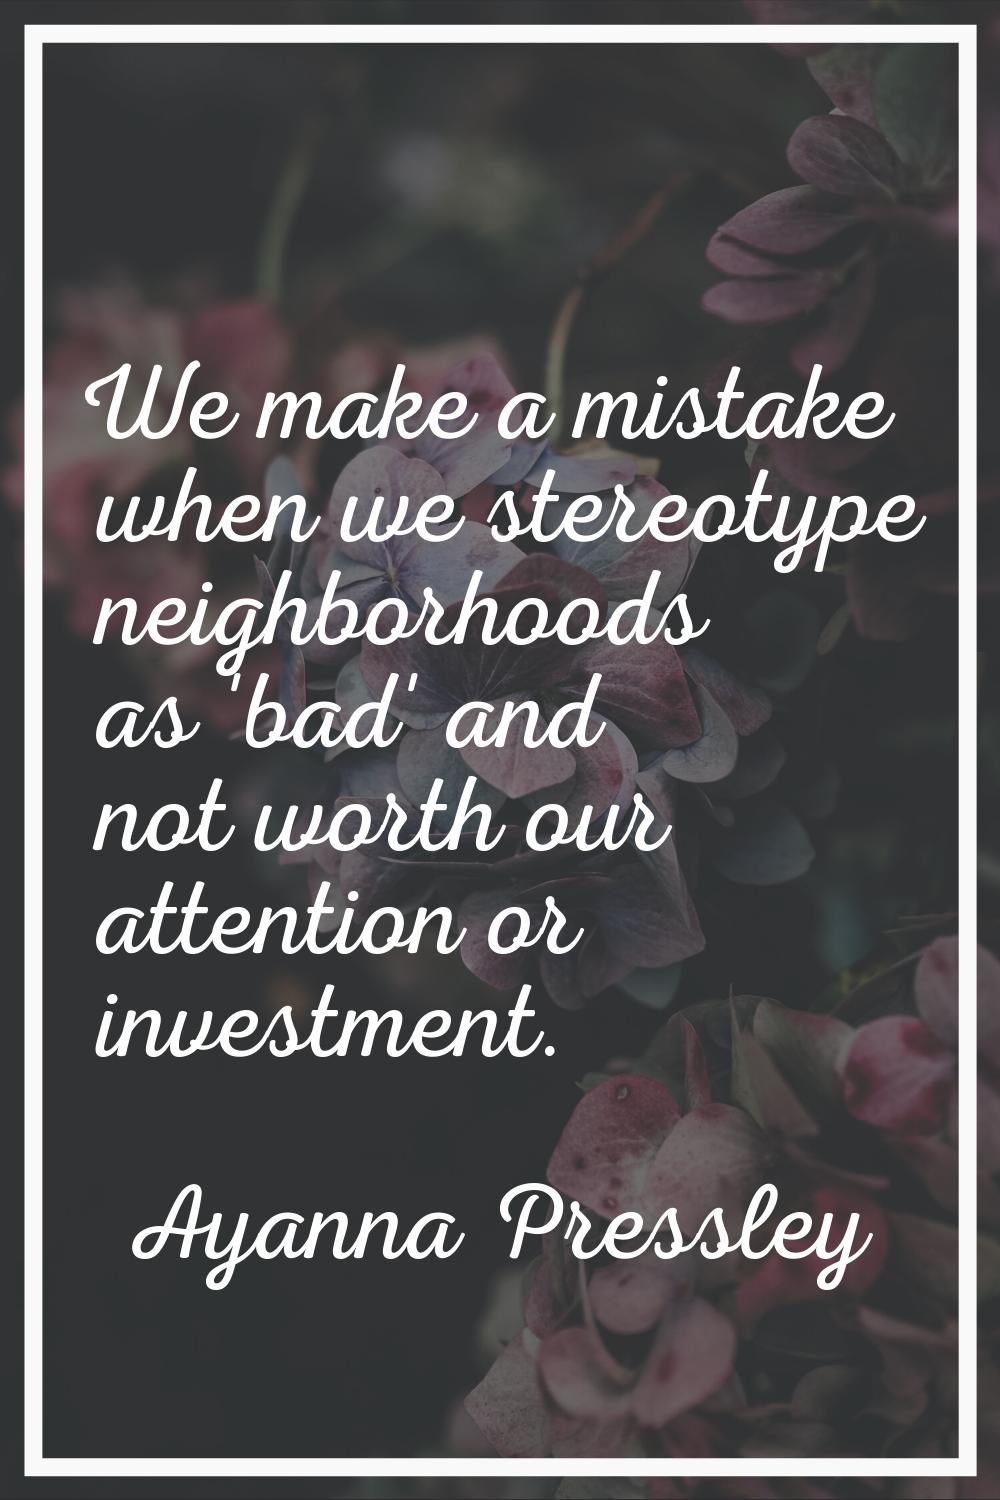 We make a mistake when we stereotype neighborhoods as 'bad' and not worth our attention or investme